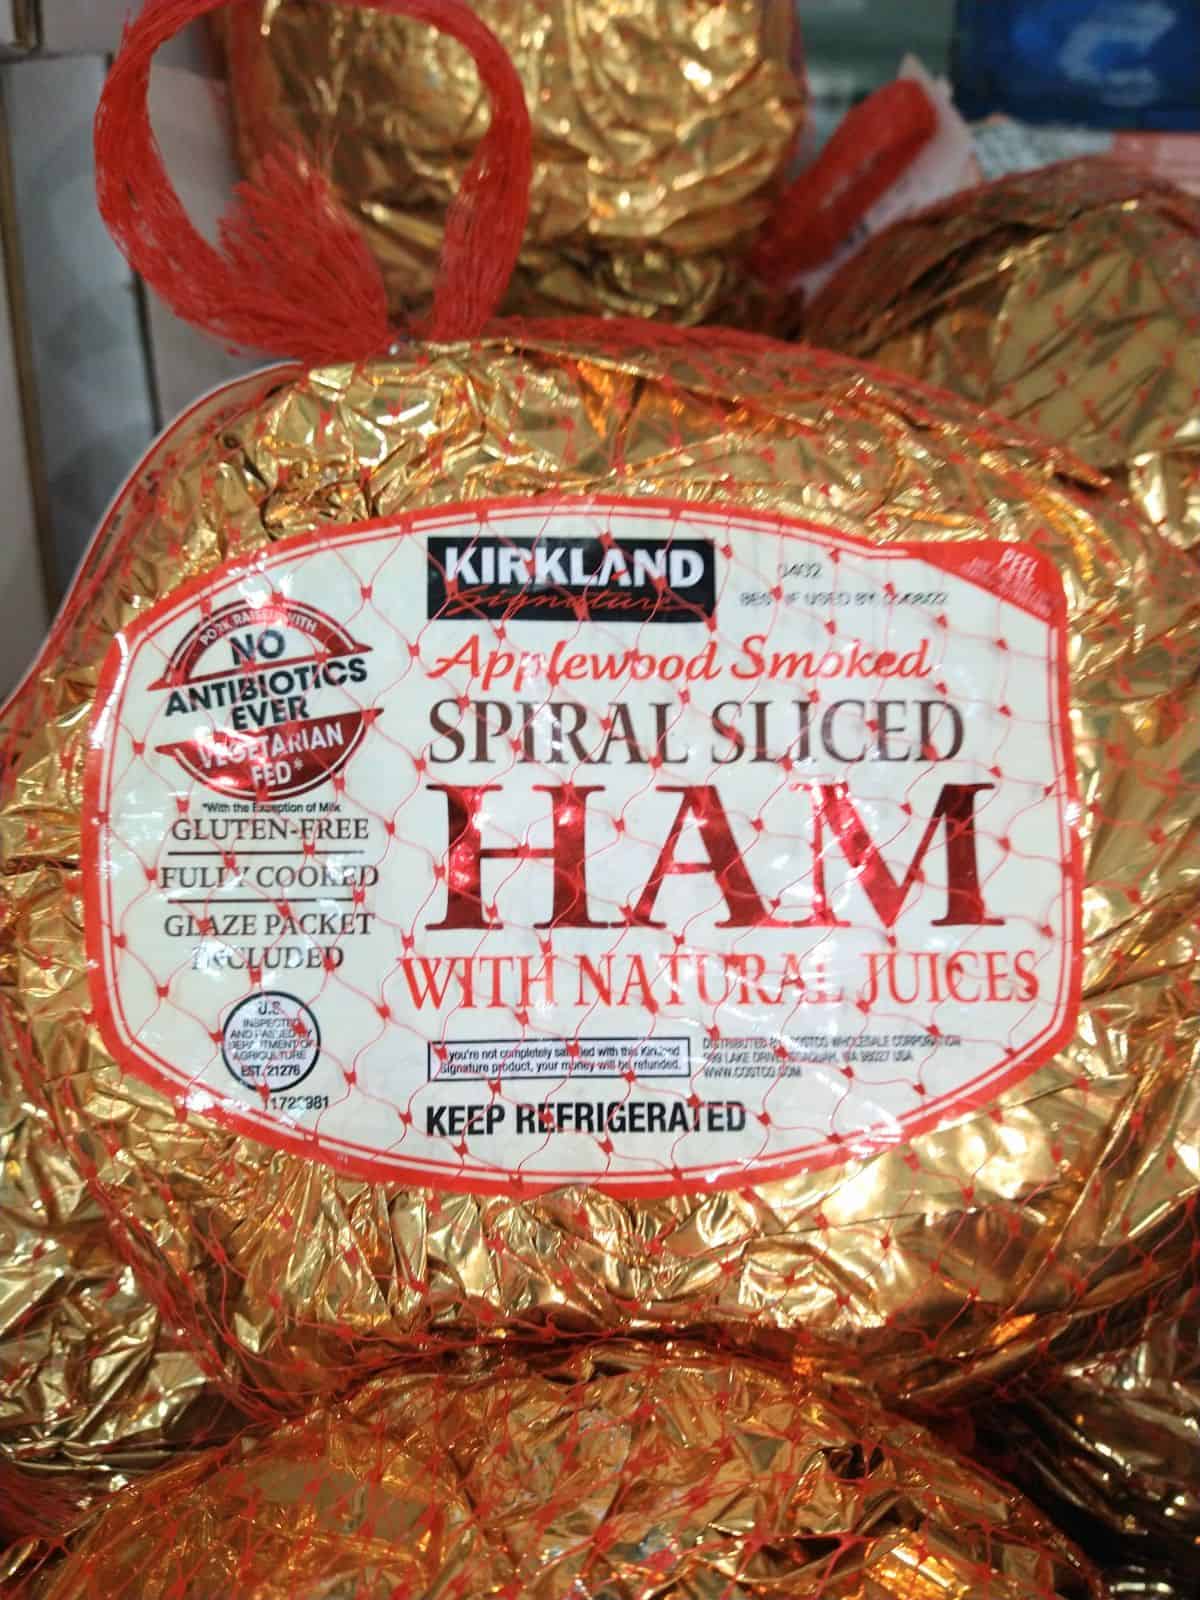 Kirkland Foil Packaged Applewood Smoked Spiral Sliced Ham with nature juices